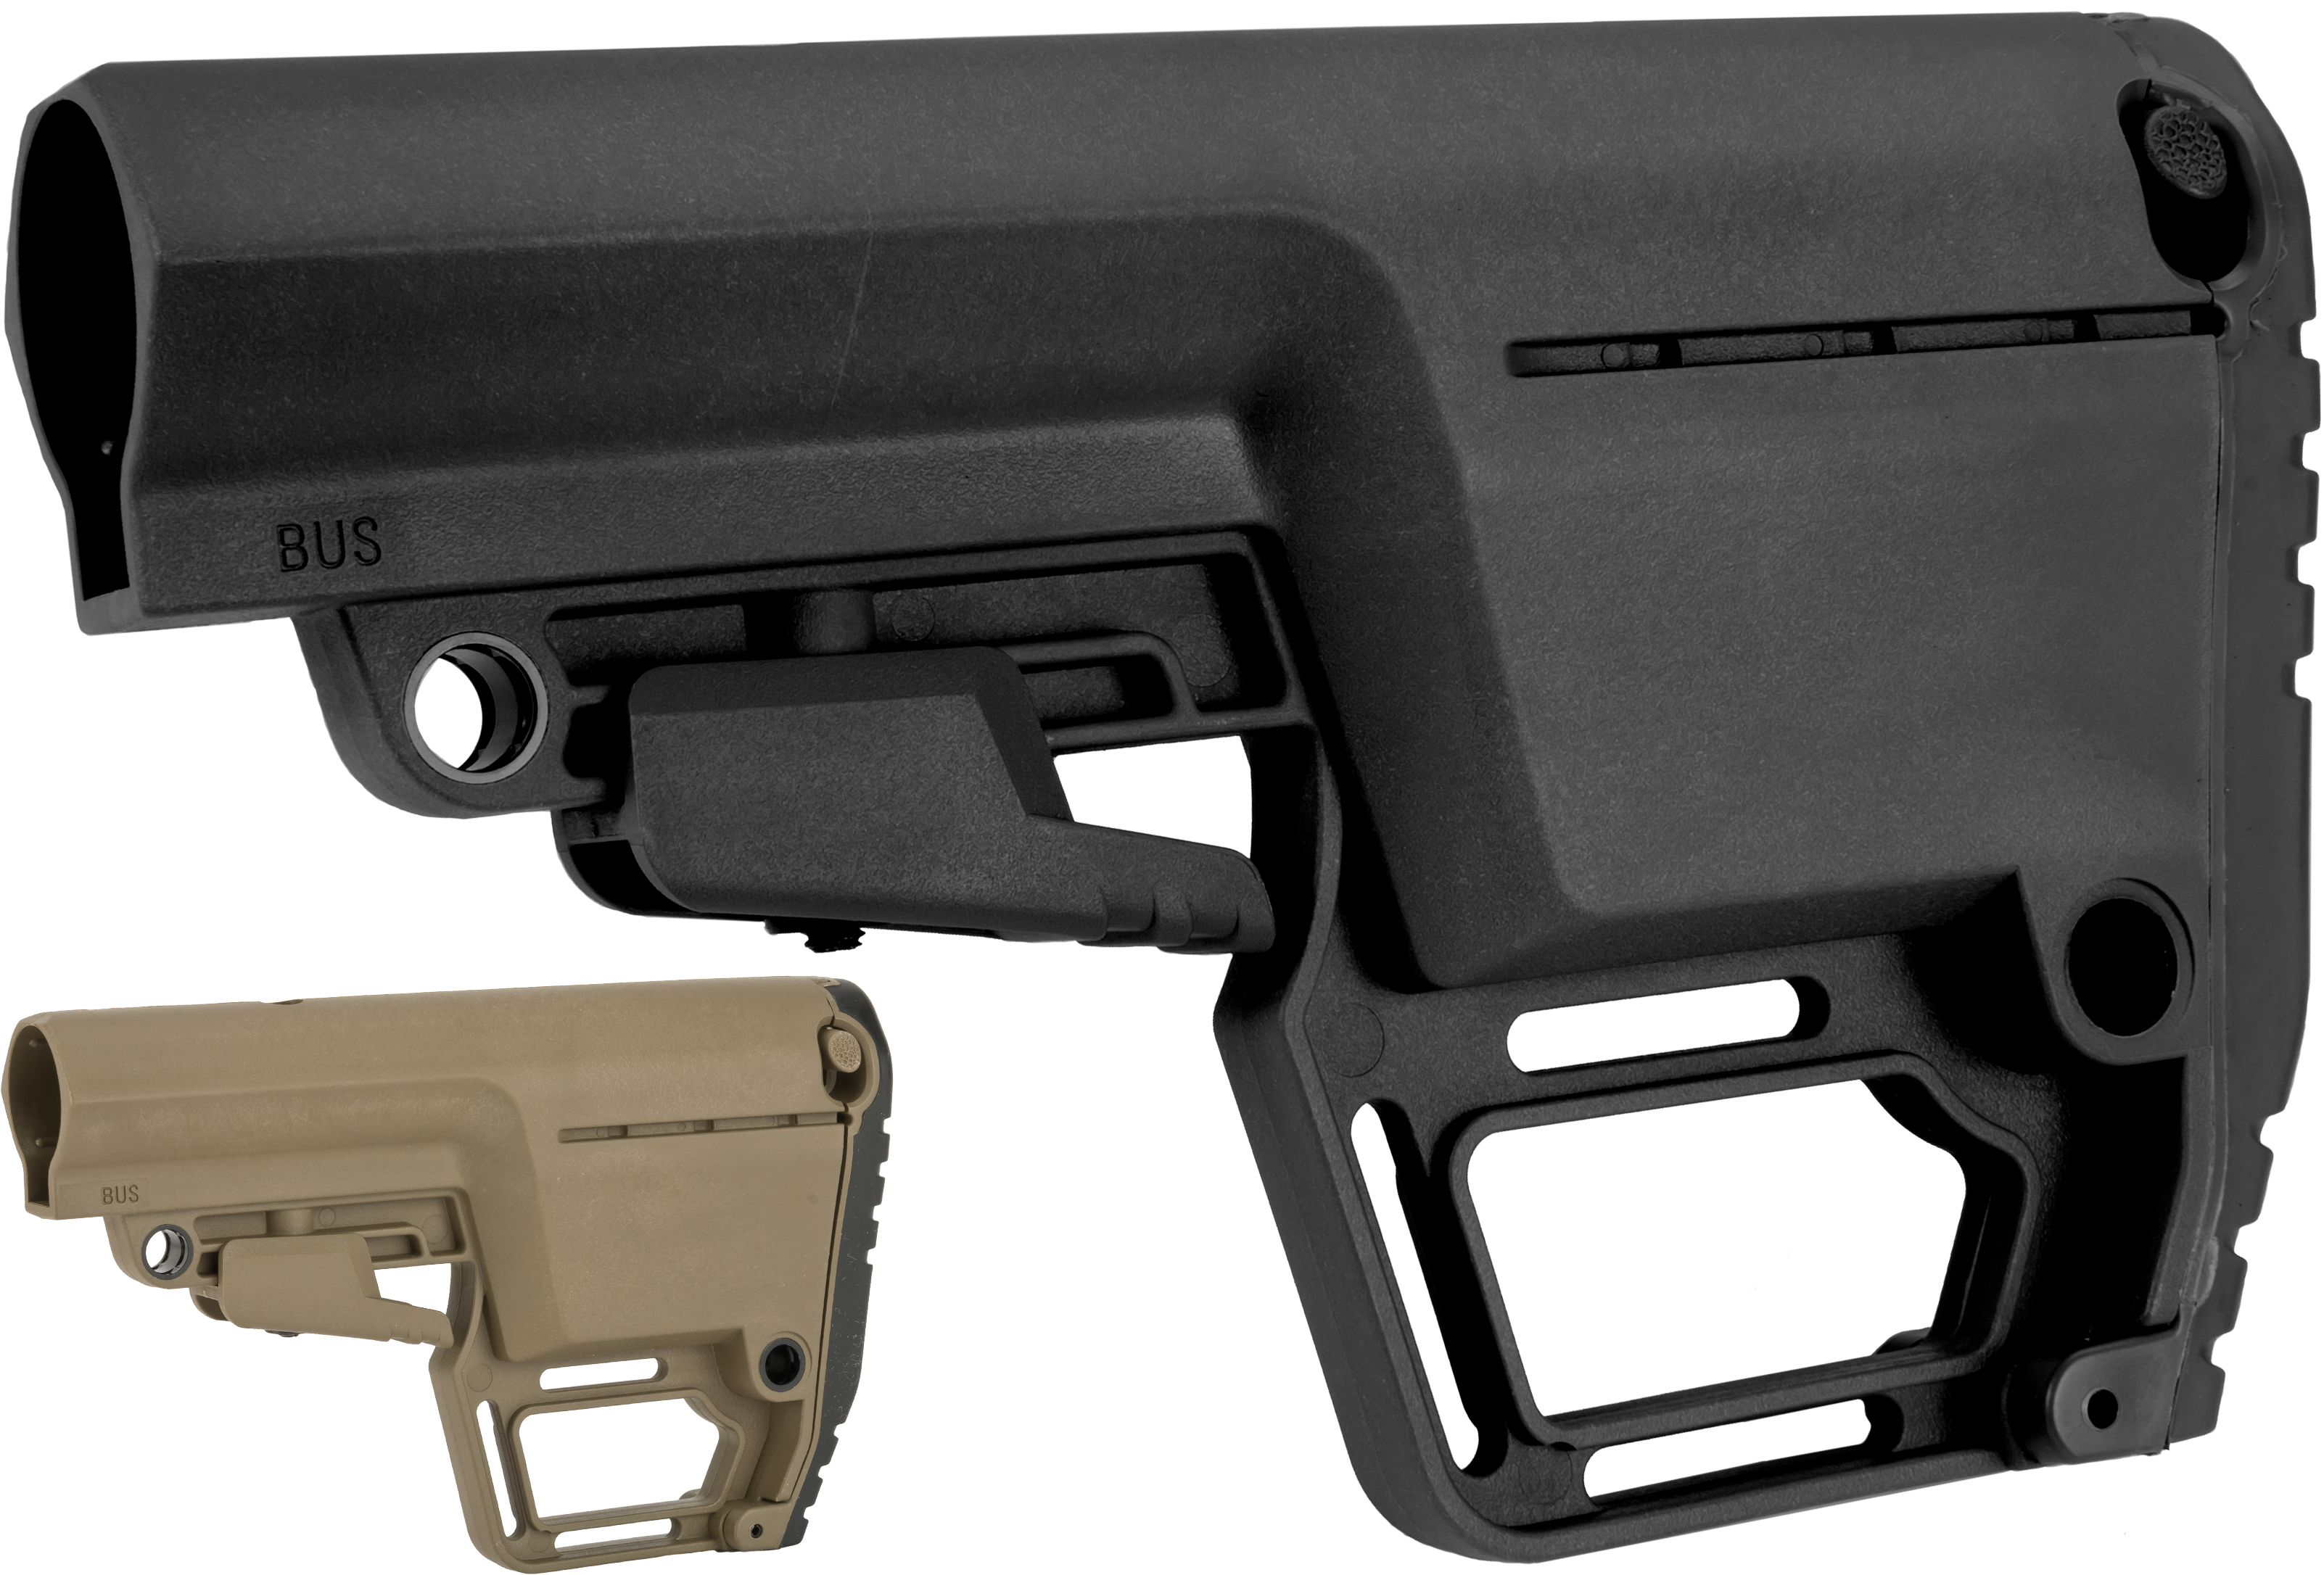 Mission First Tactical Battlelink Utility Stock for M4 Series AEG (Color: Black)